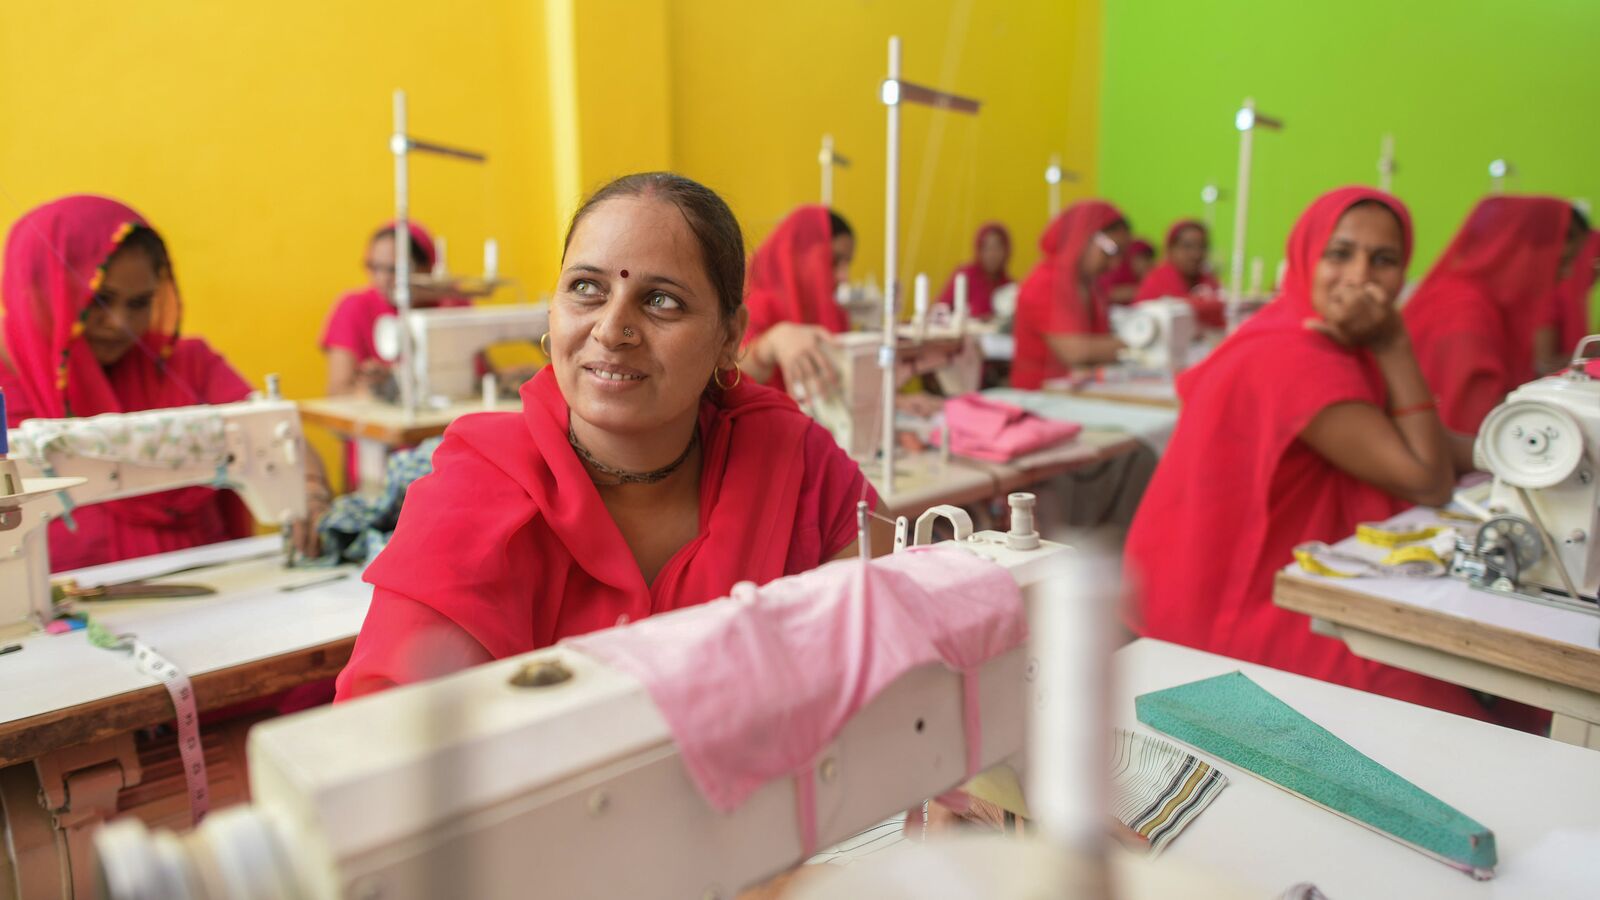 Gig workers in India sew clothes